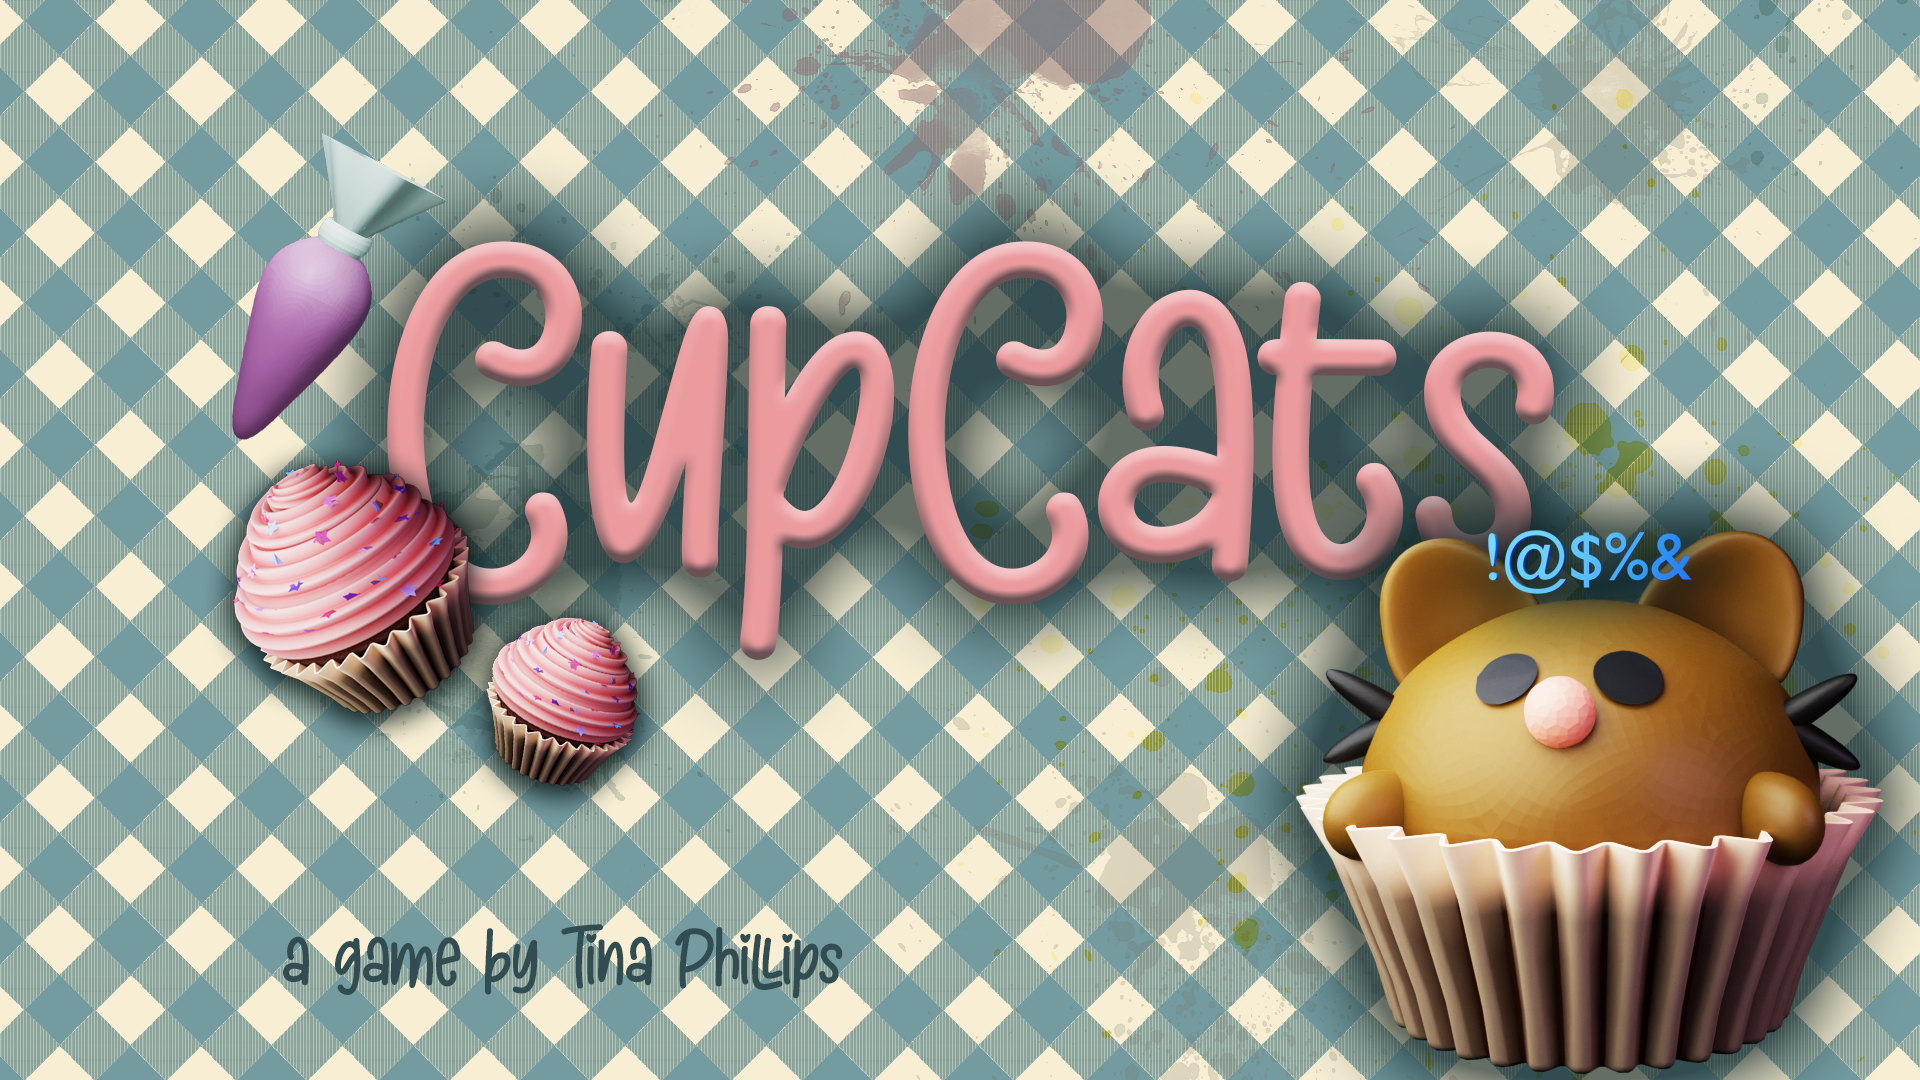 CupCats - New and improved - Intro to unity final - Tina P